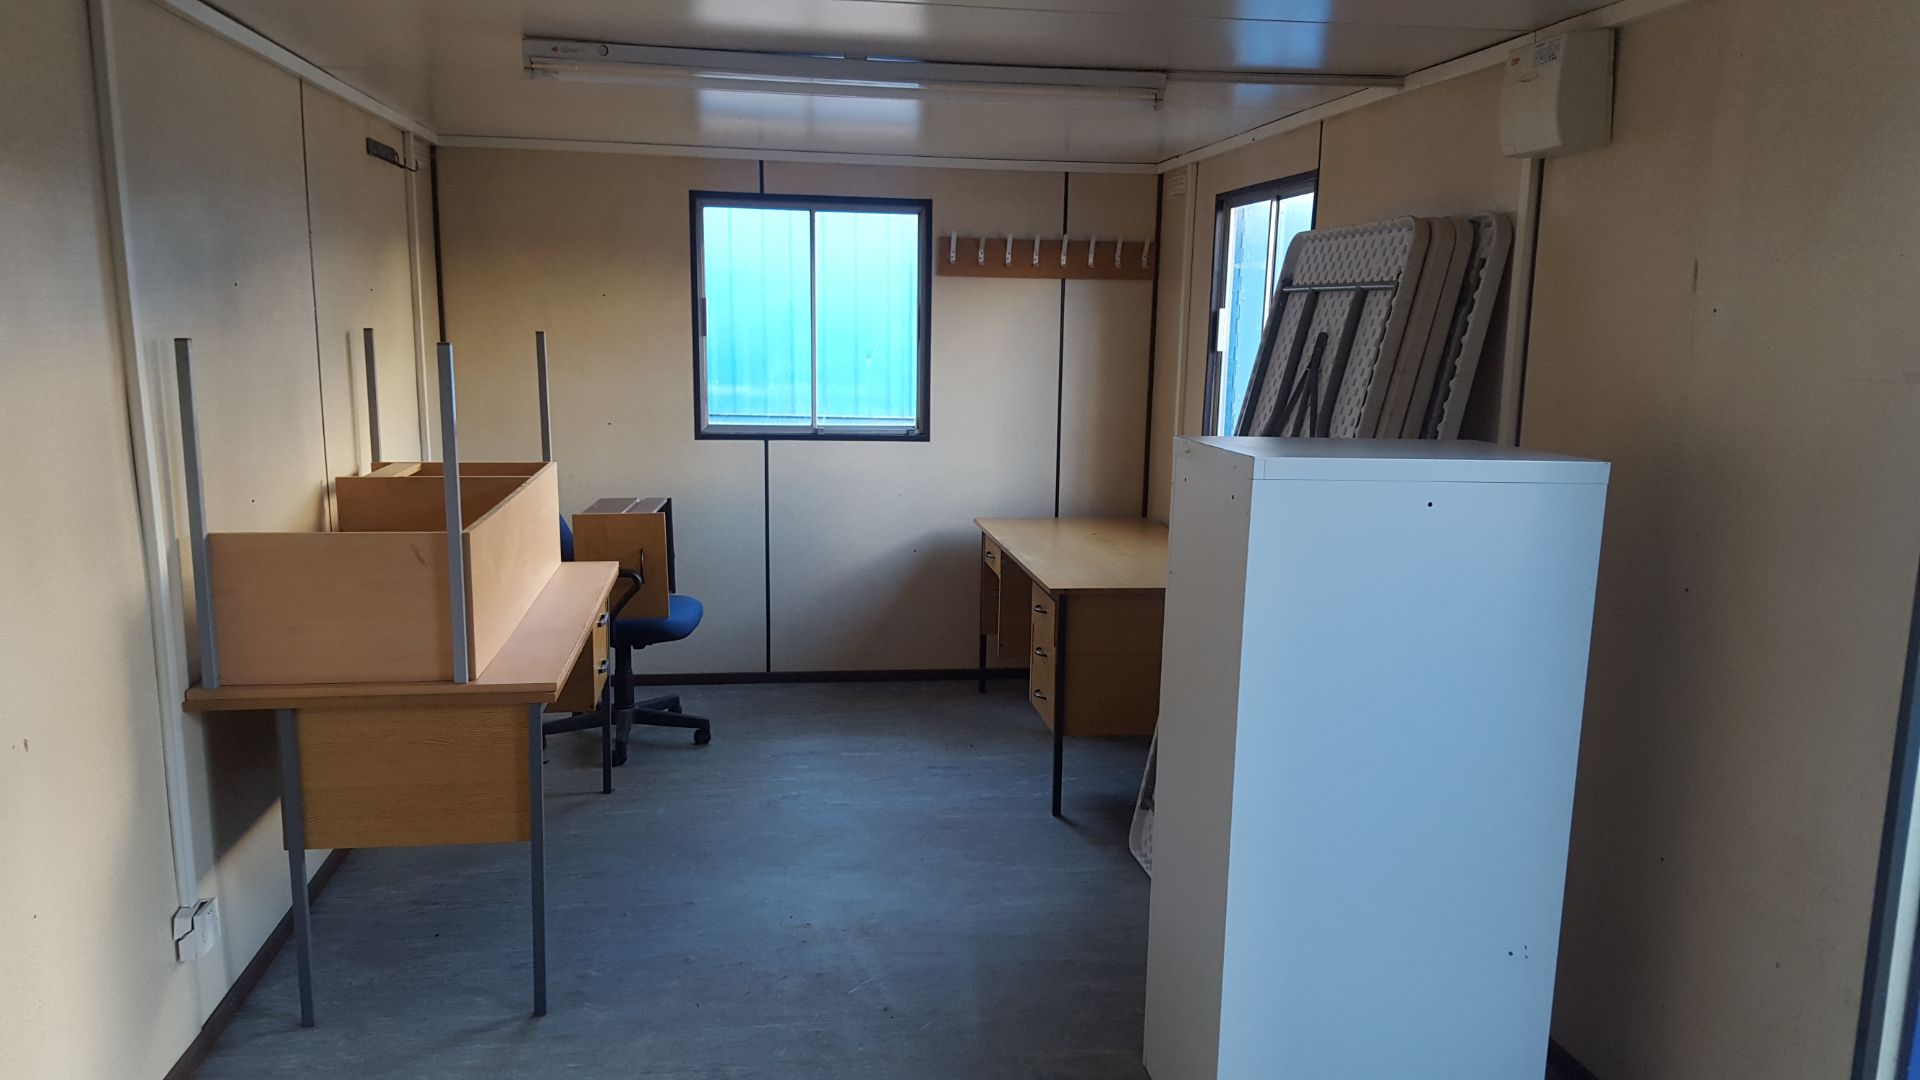 30 x 10 Anti Vandal Office / Canteen / Container - Image 3 of 8